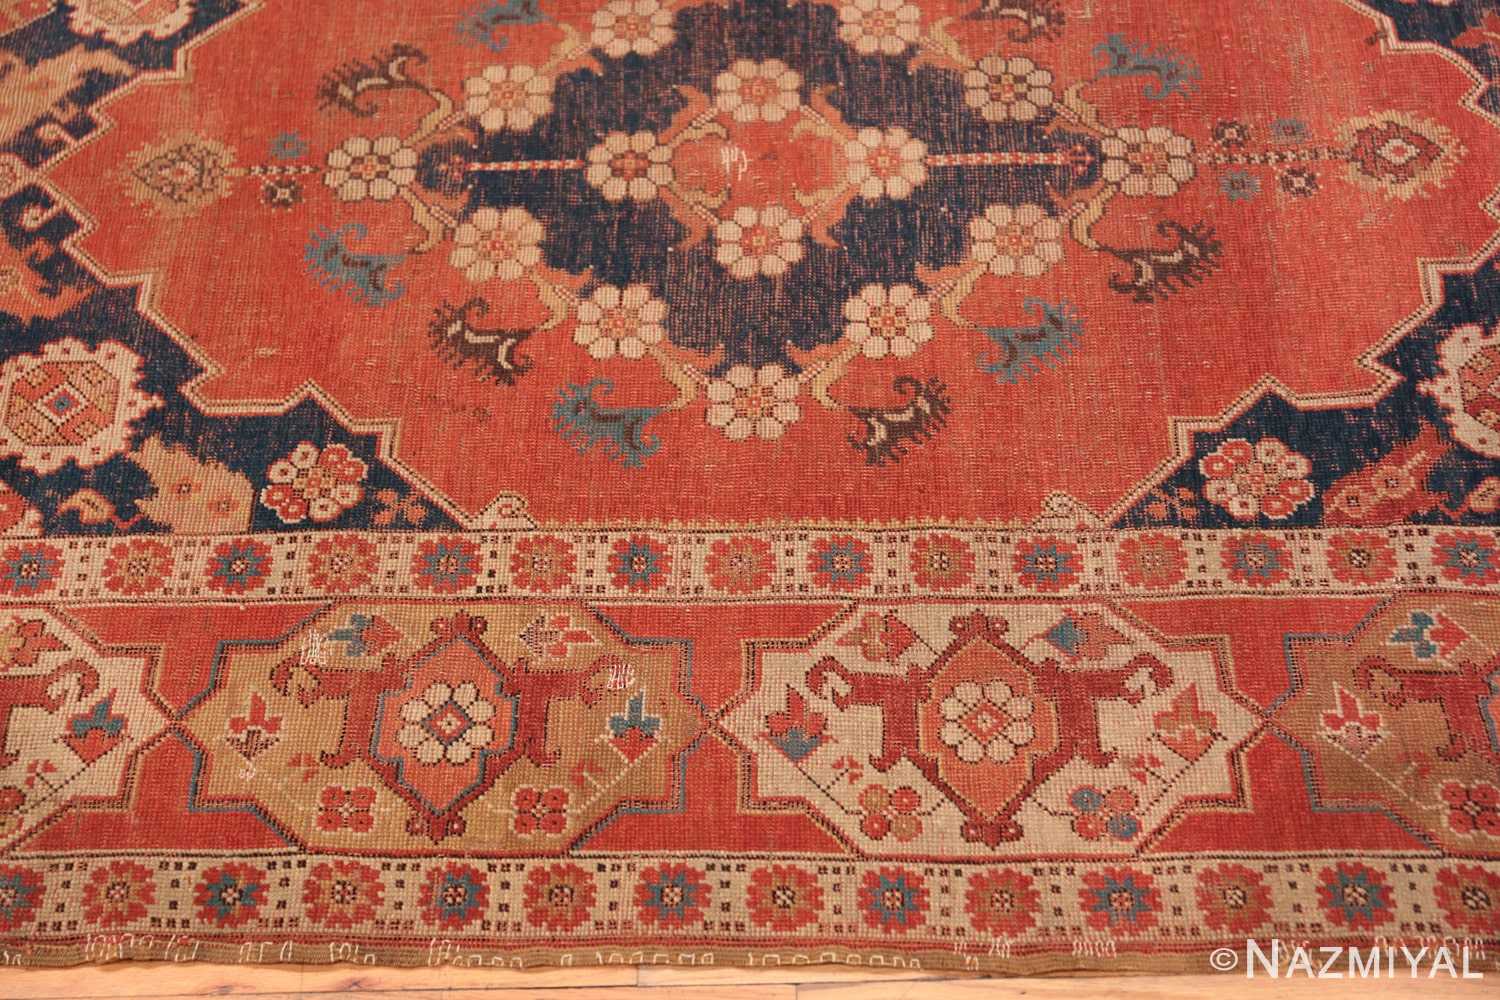 Border 17th century antique Transylvanian rug 70169 by Nazmiyal antique rugs collection